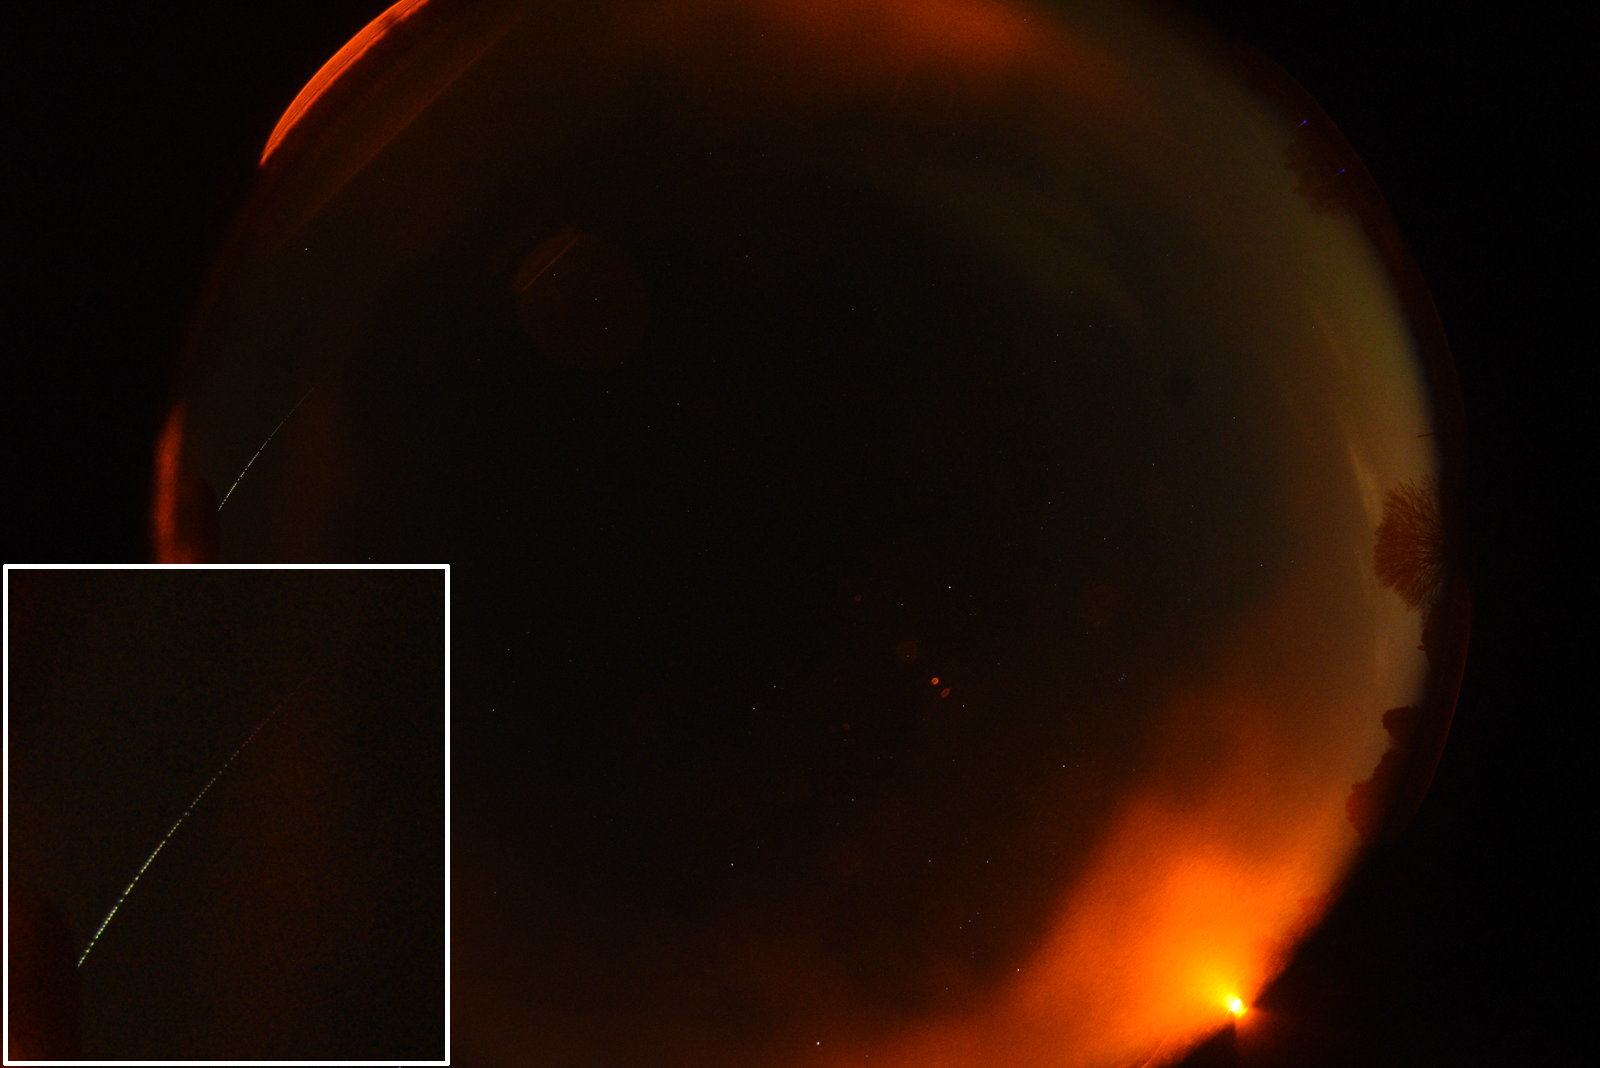 16 Feb 2020 fireball as captured by UKFN camera system in Lincoln